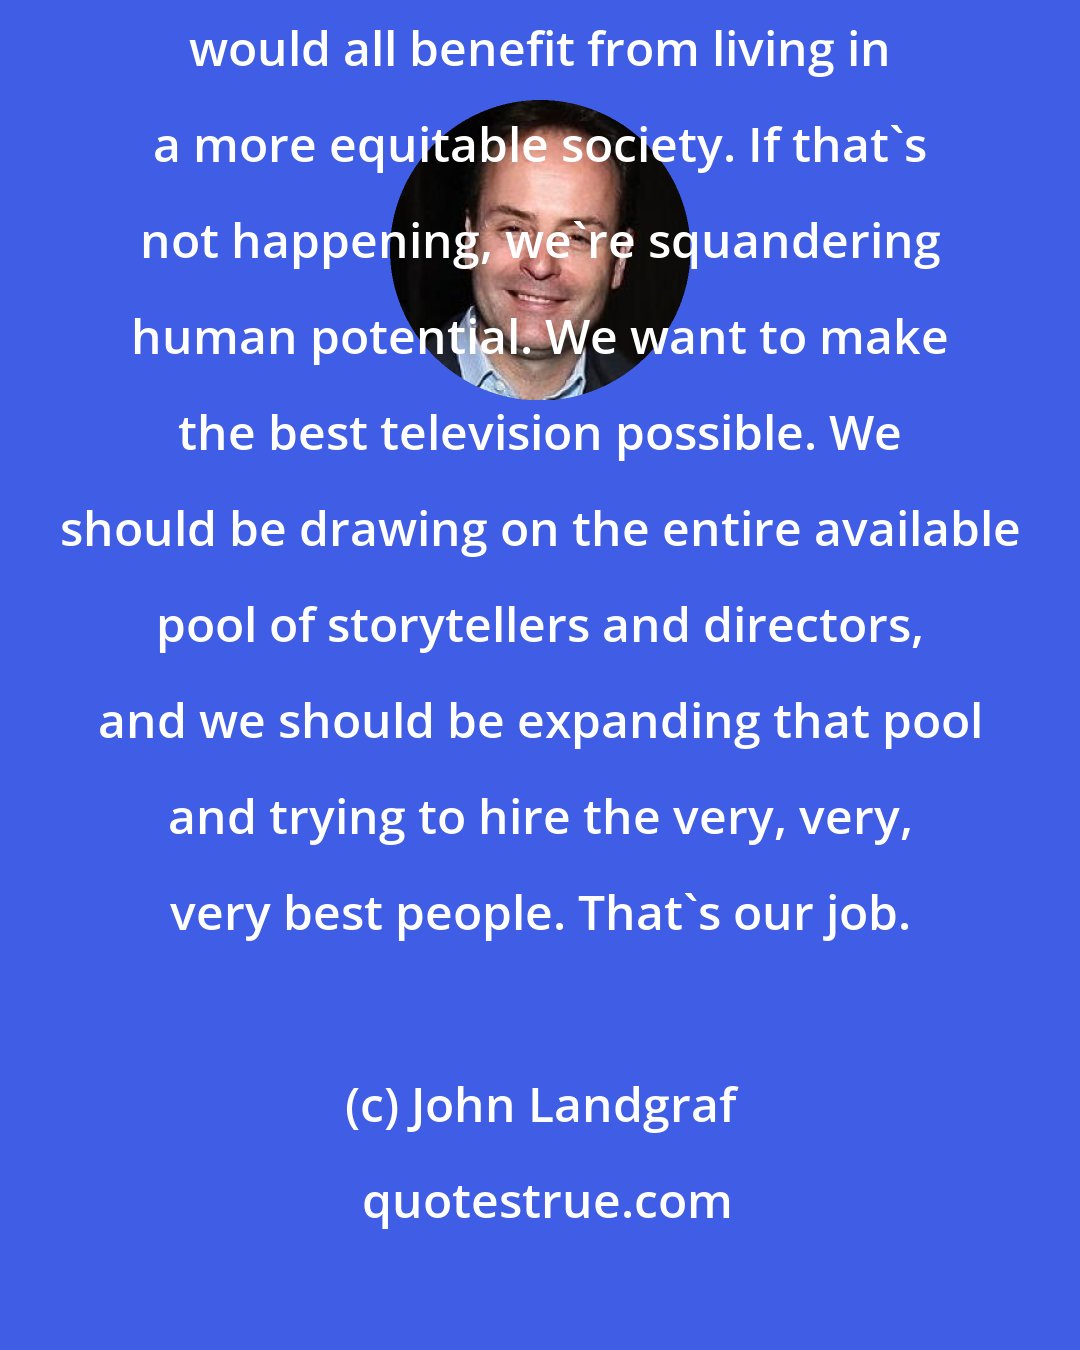 John Landgraf: Well, equity matters. I hope that most of us believe that we actually would all benefit from living in a more equitable society. If that's not happening, we're squandering human potential. We want to make the best television possible. We should be drawing on the entire available pool of storytellers and directors, and we should be expanding that pool and trying to hire the very, very, very best people. That's our job.